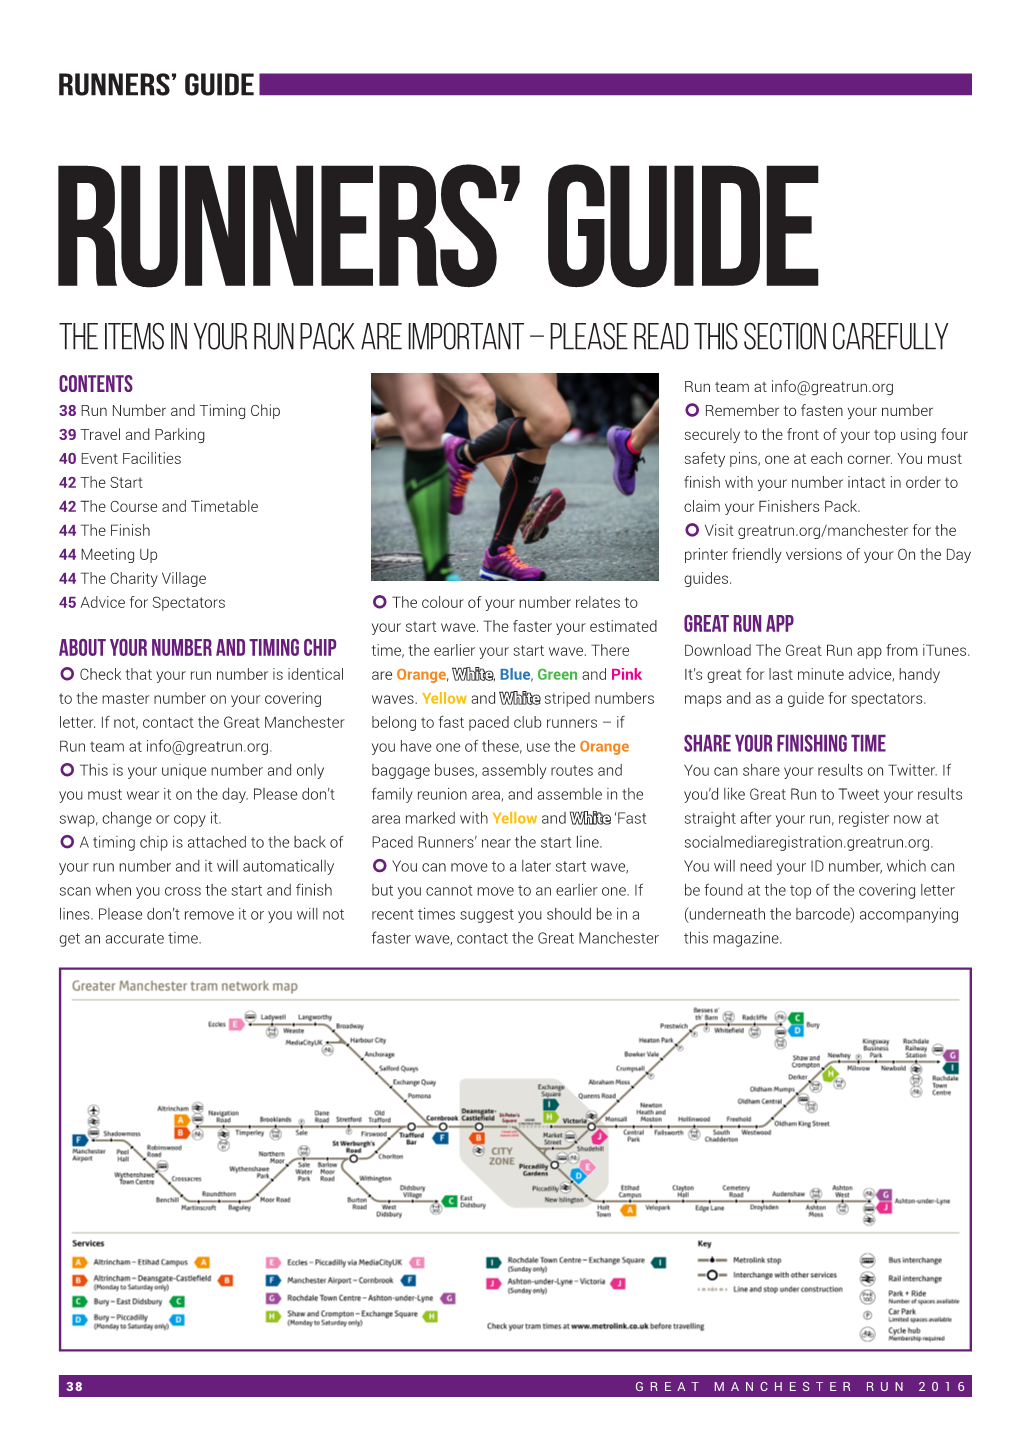 The Items in Your Run Pack Are Important – Please Read This Section Carefully